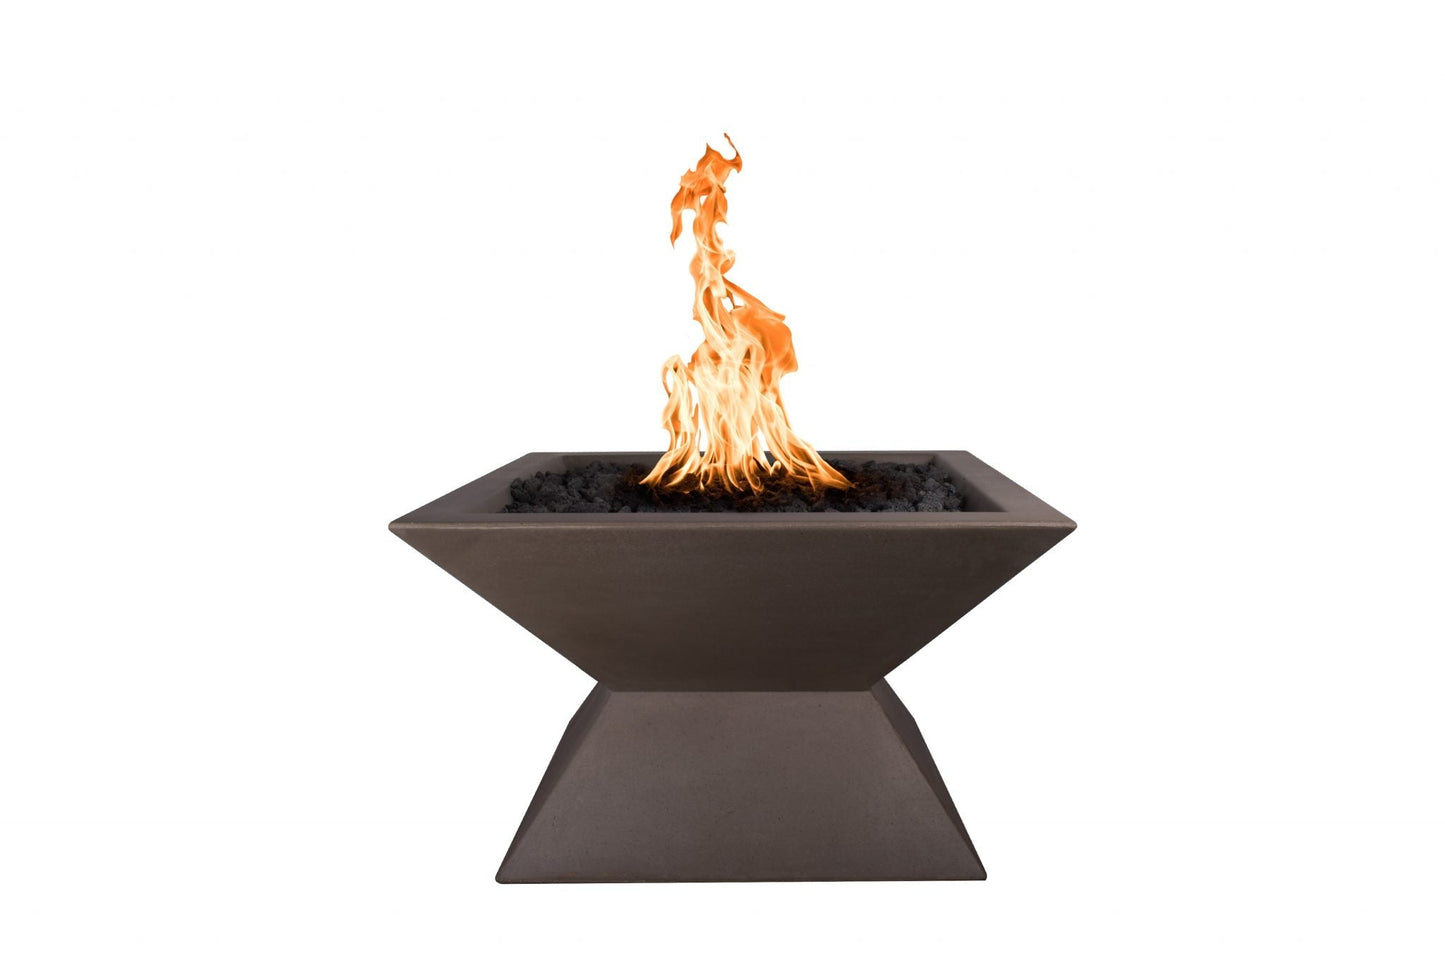 The Outdoor Plus Square Uxmal 30" Rustic Moss Stone GFRC Concrete Liquid Propane Fire Pit with 12V Electronic Ignition